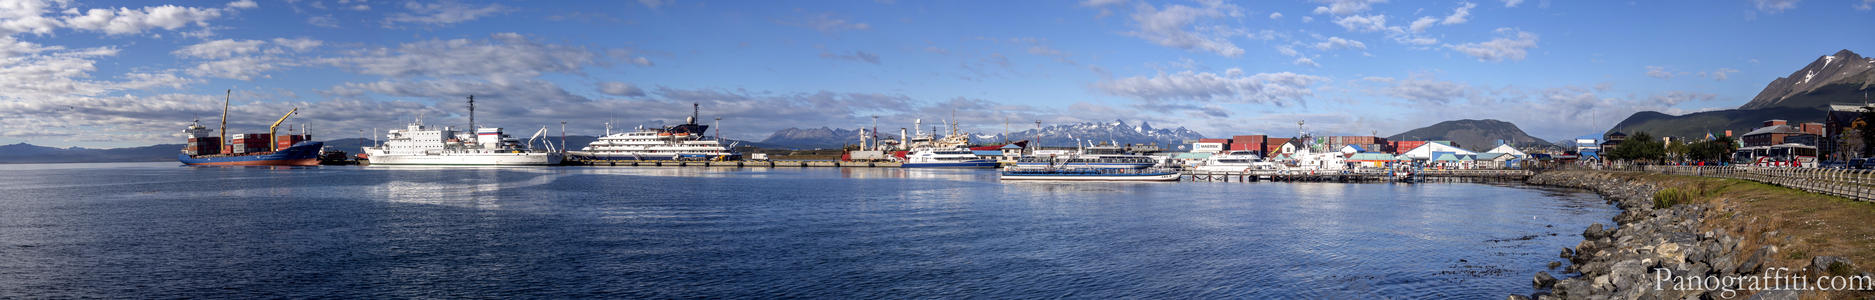 Sunshine Highlighting the Akademik Ioffe - Ushuaia harbor and wharf just a few hours before departing aboard the Russian ship named the Ioffe for a 12 day cruise to Antarctica at the end of March